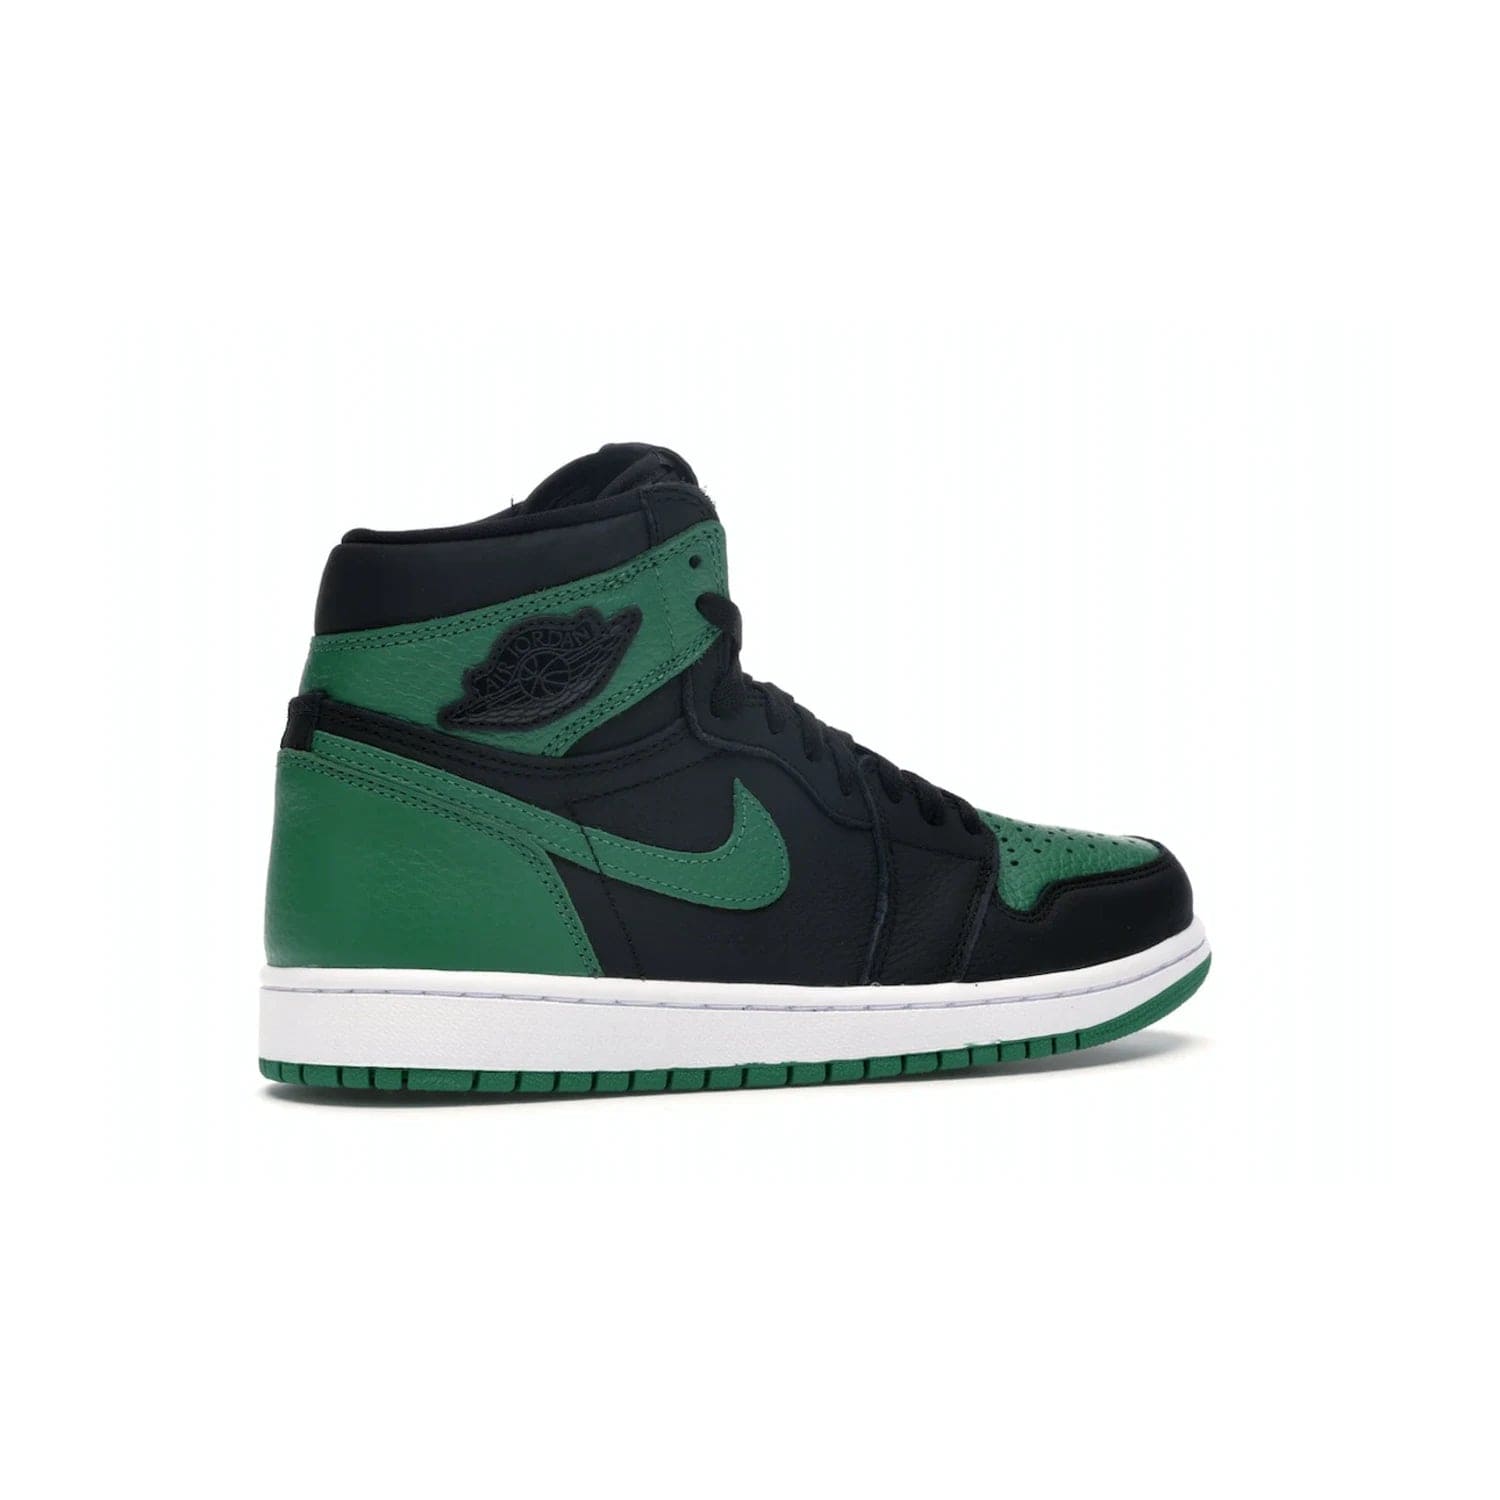 Jordan 1 Retro High Pine Green Black - Image 34 - Only at www.BallersClubKickz.com - Step into fresh style with the Jordan 1 Retro High Pine Green Black. Combining a black tumbled leather upper with green leather overlays, this sneaker features a Gym Red embroidered tongue tag, sail midsole, and pine green outsole for iconic style with a unique twist.